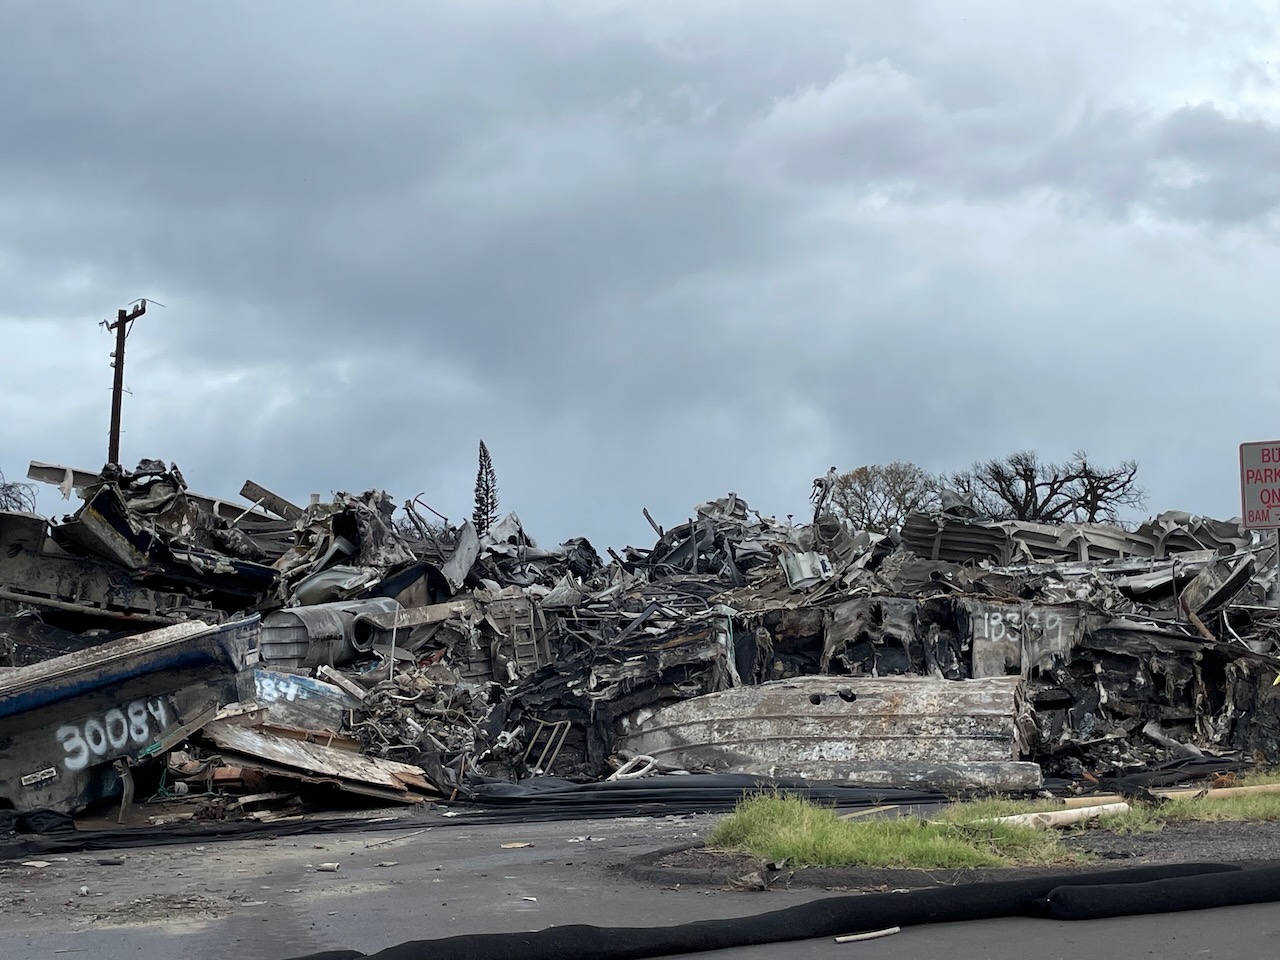 Burned and damaged vessels removed from Lahaina Harbor at the disposition lot in Lahaina, Maui.